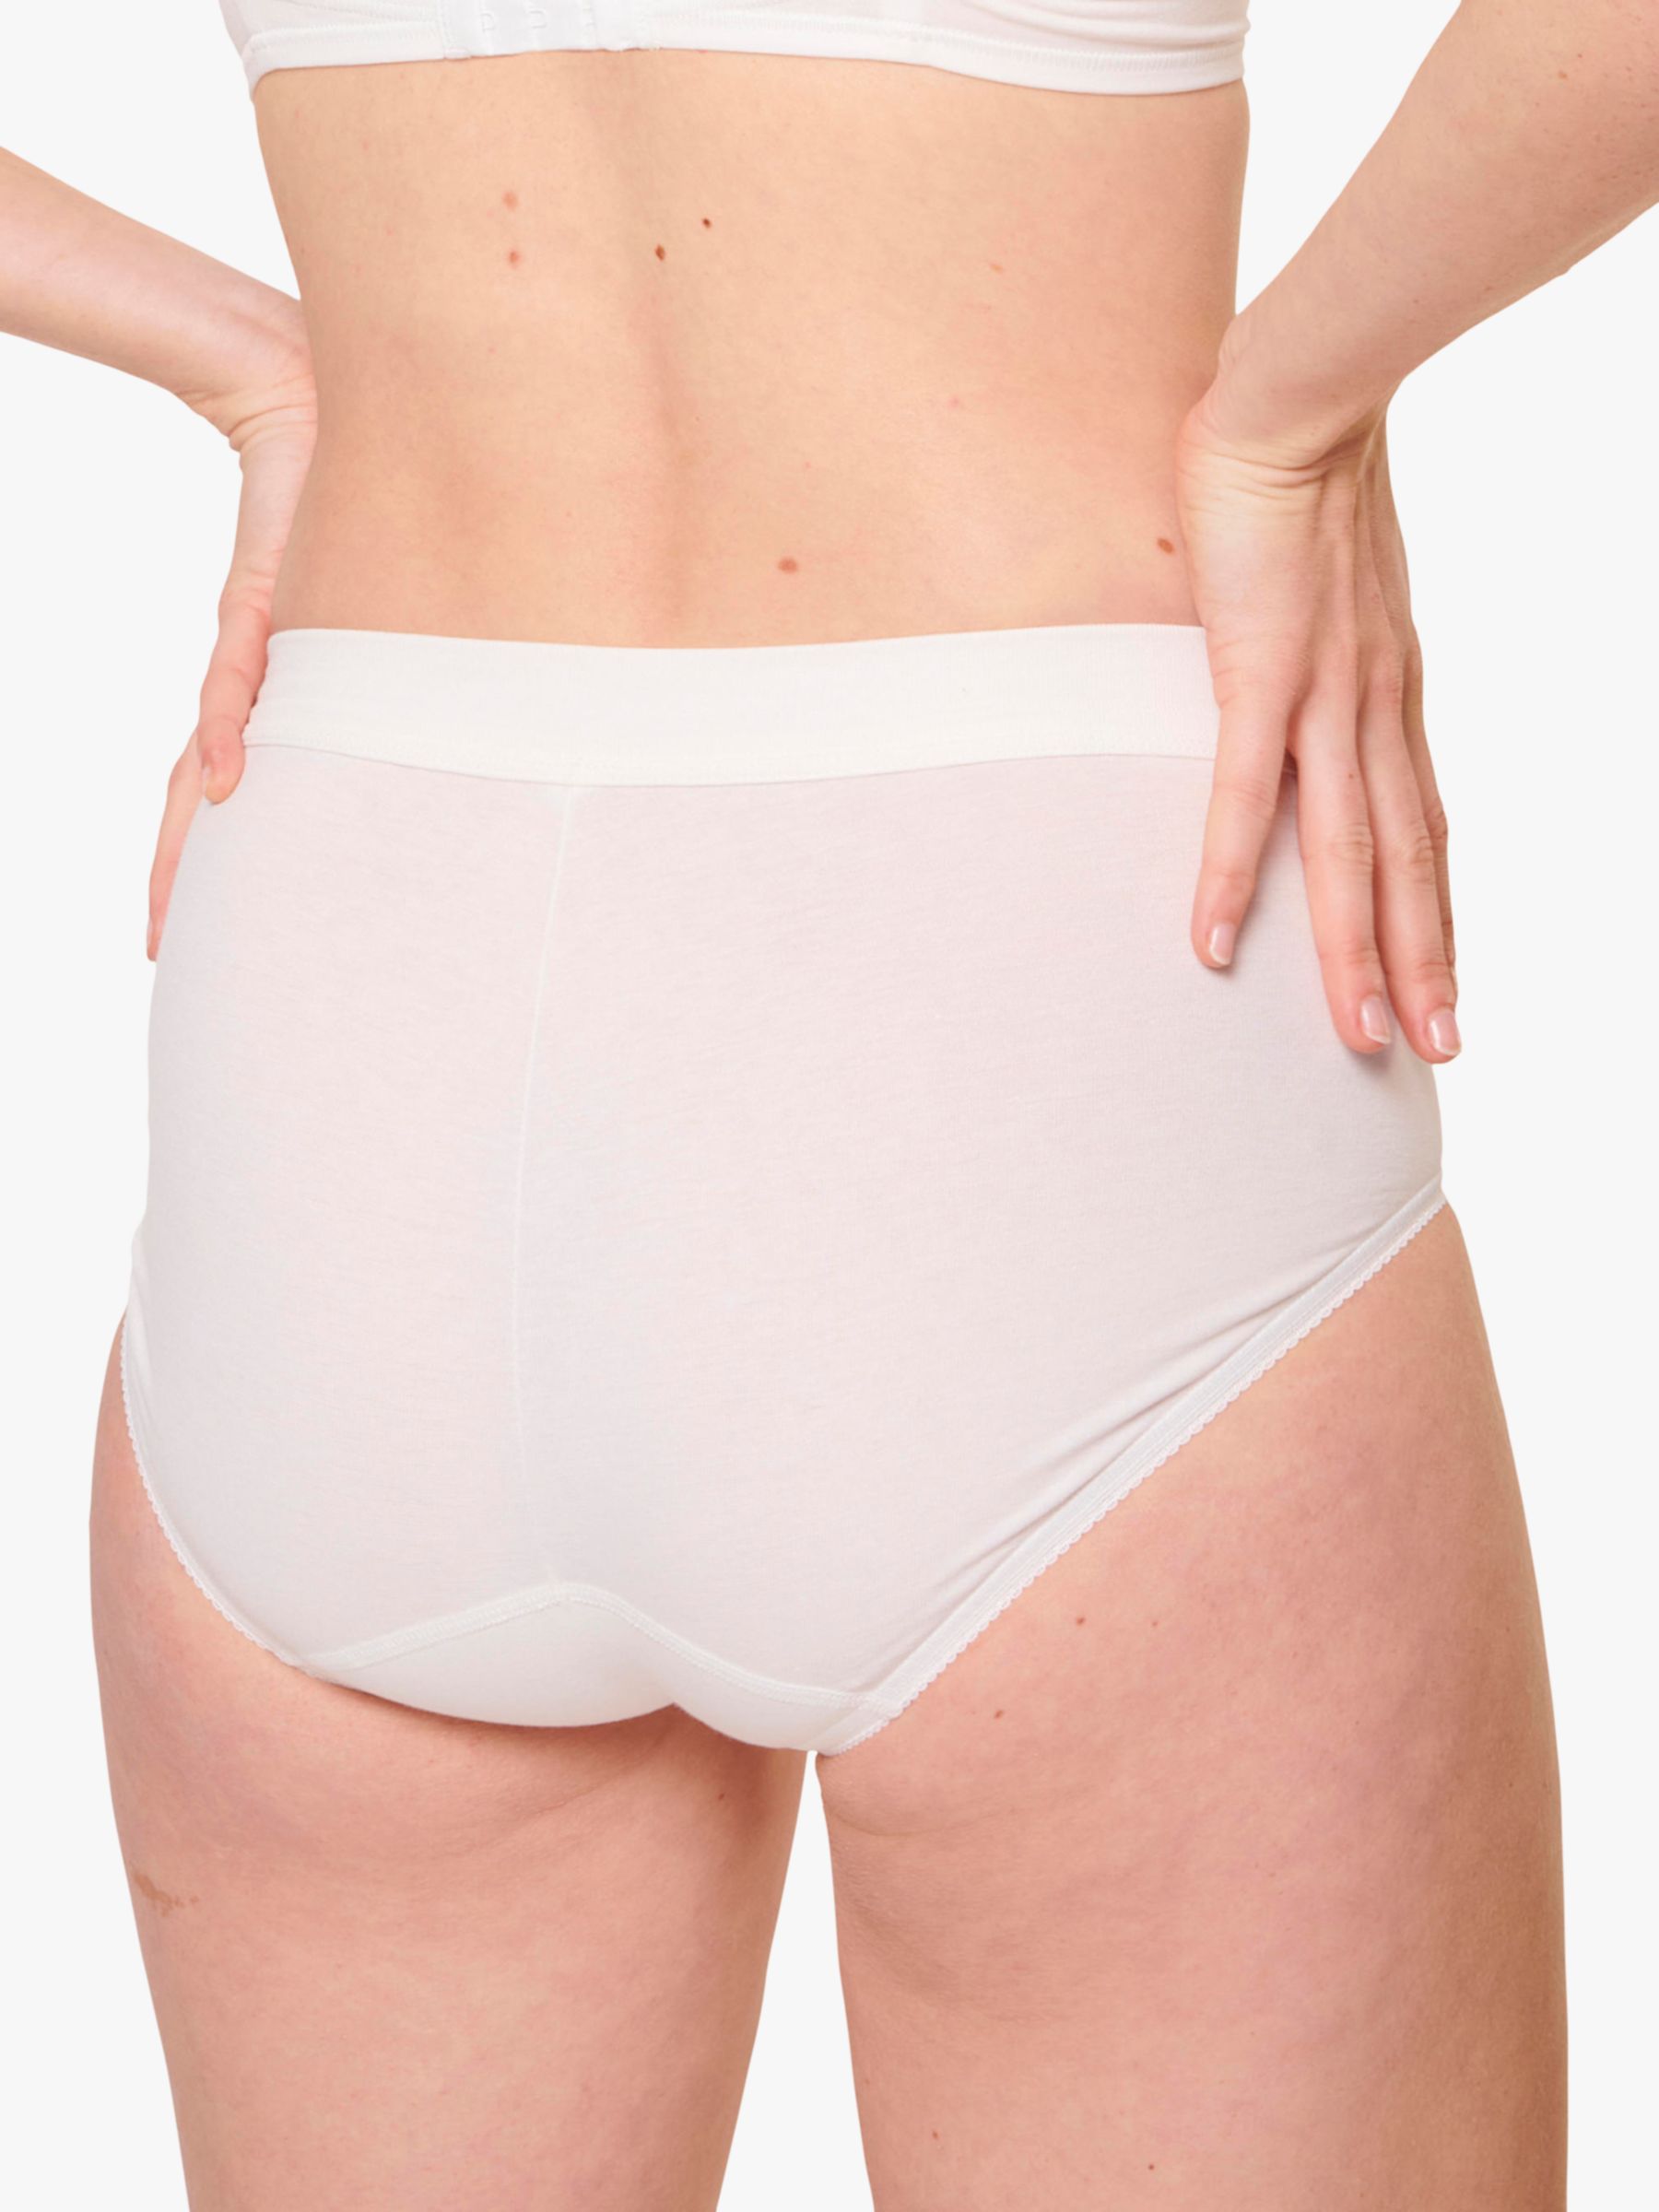 Buy sloggi Double Comfort Maxi Knickers, Pack of 2 Online at johnlewis.com